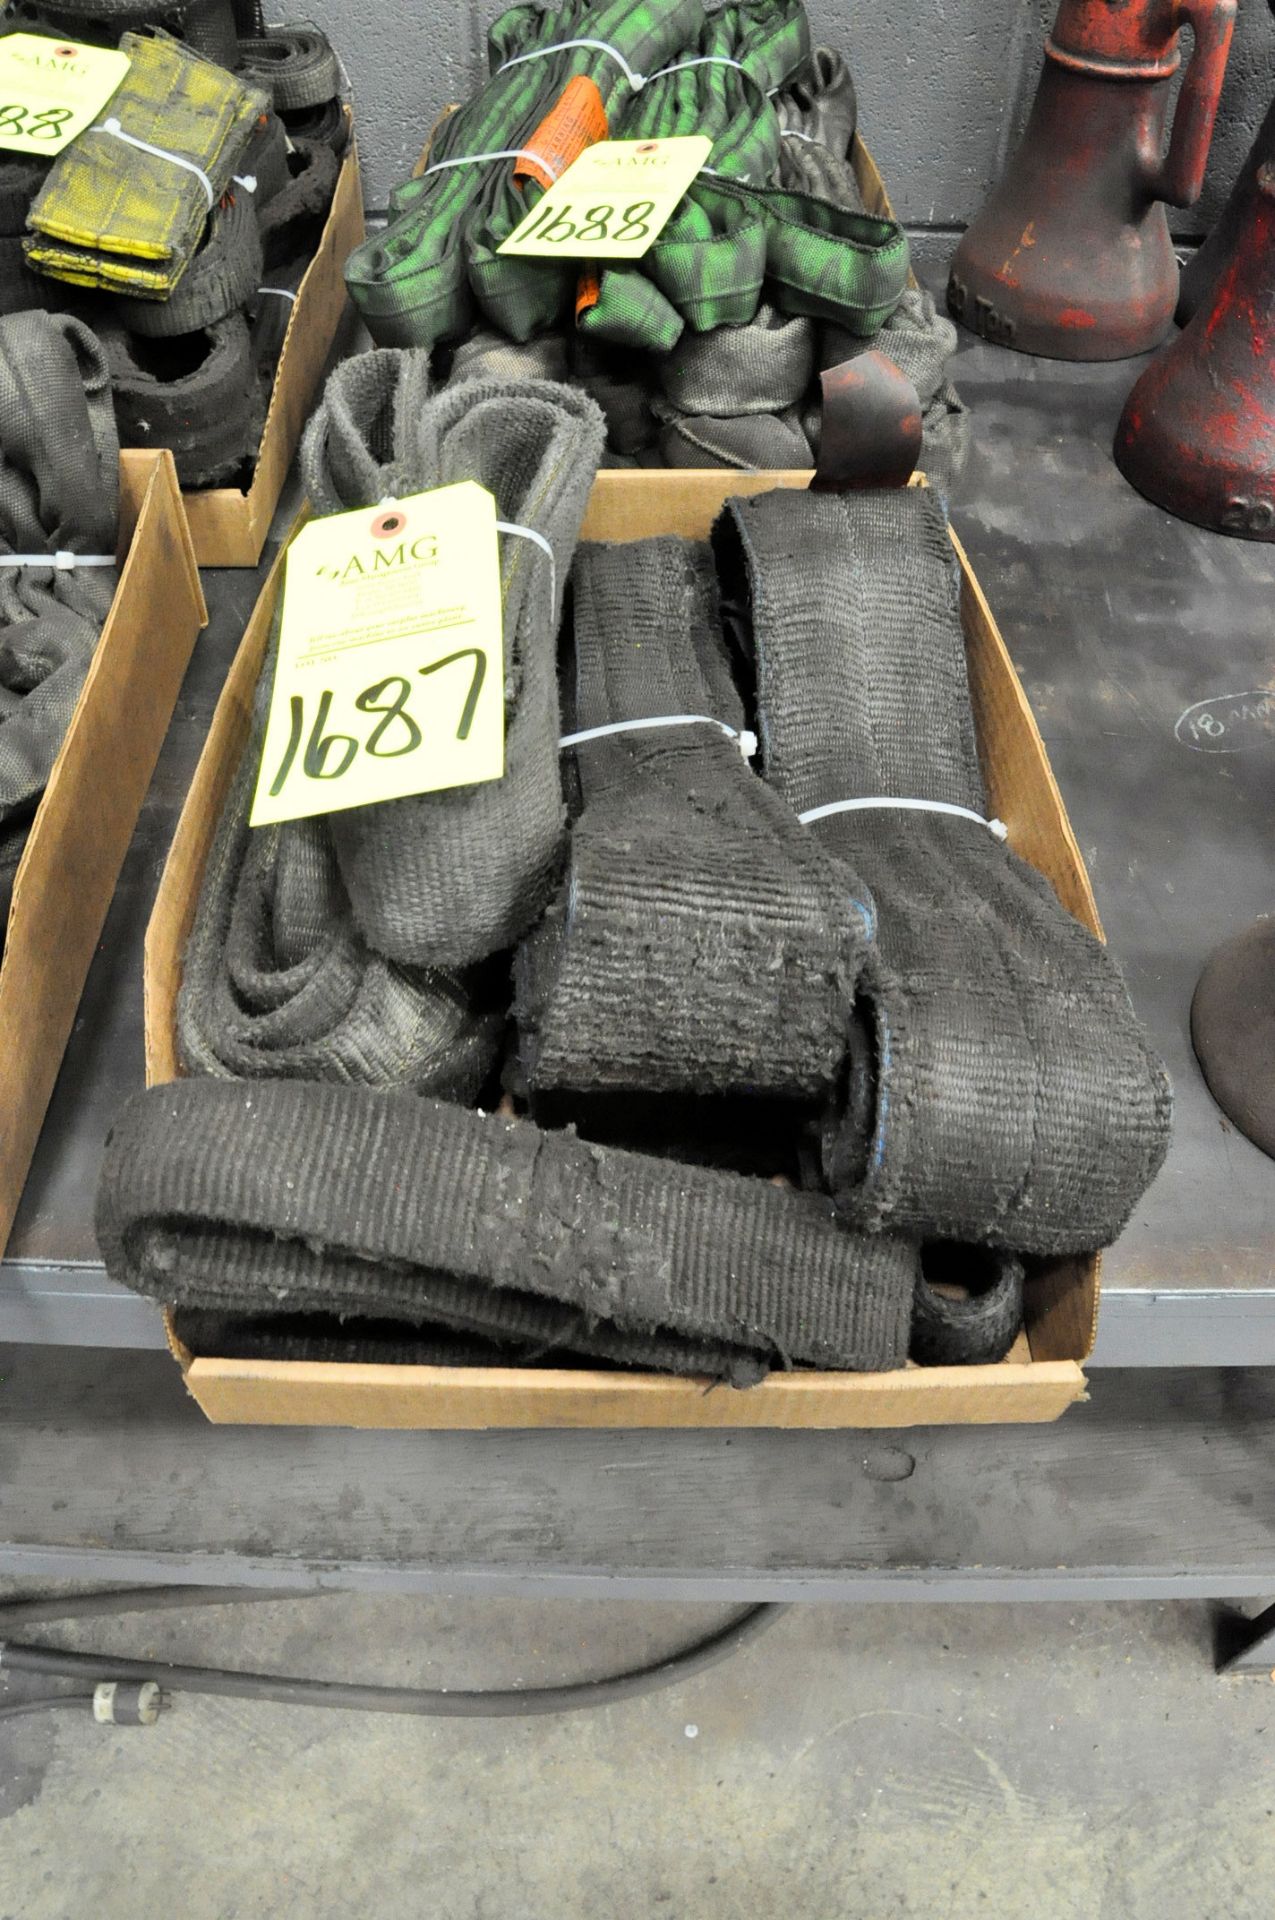 Lot-Cloth Lifting Slings in (3) Boxes, (G-26), (Yellow Tag) - Image 3 of 3